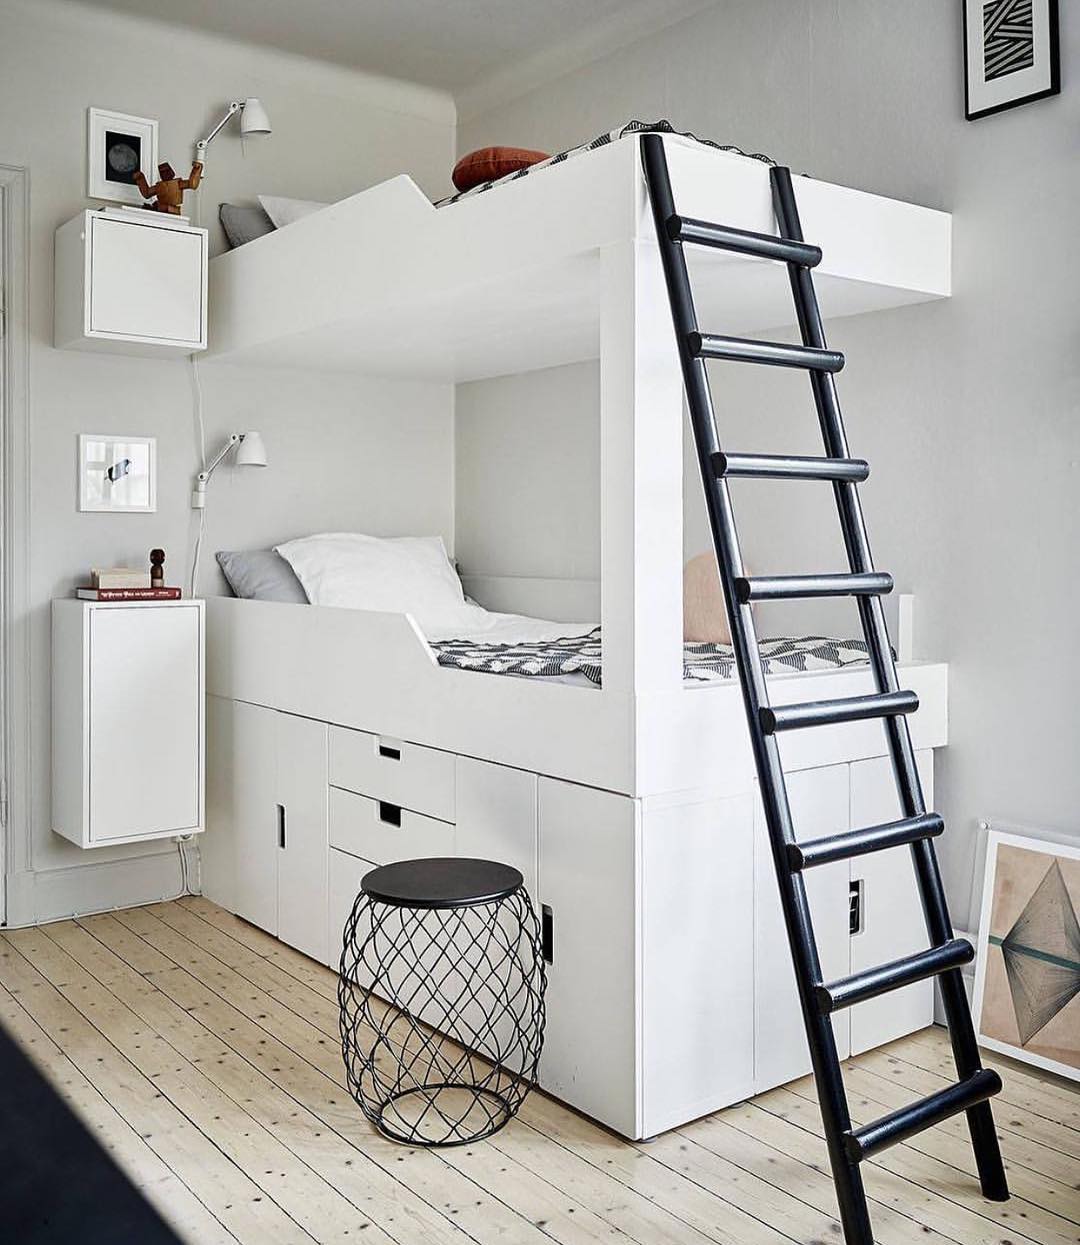 White bunk beds with storage in shared kids room.